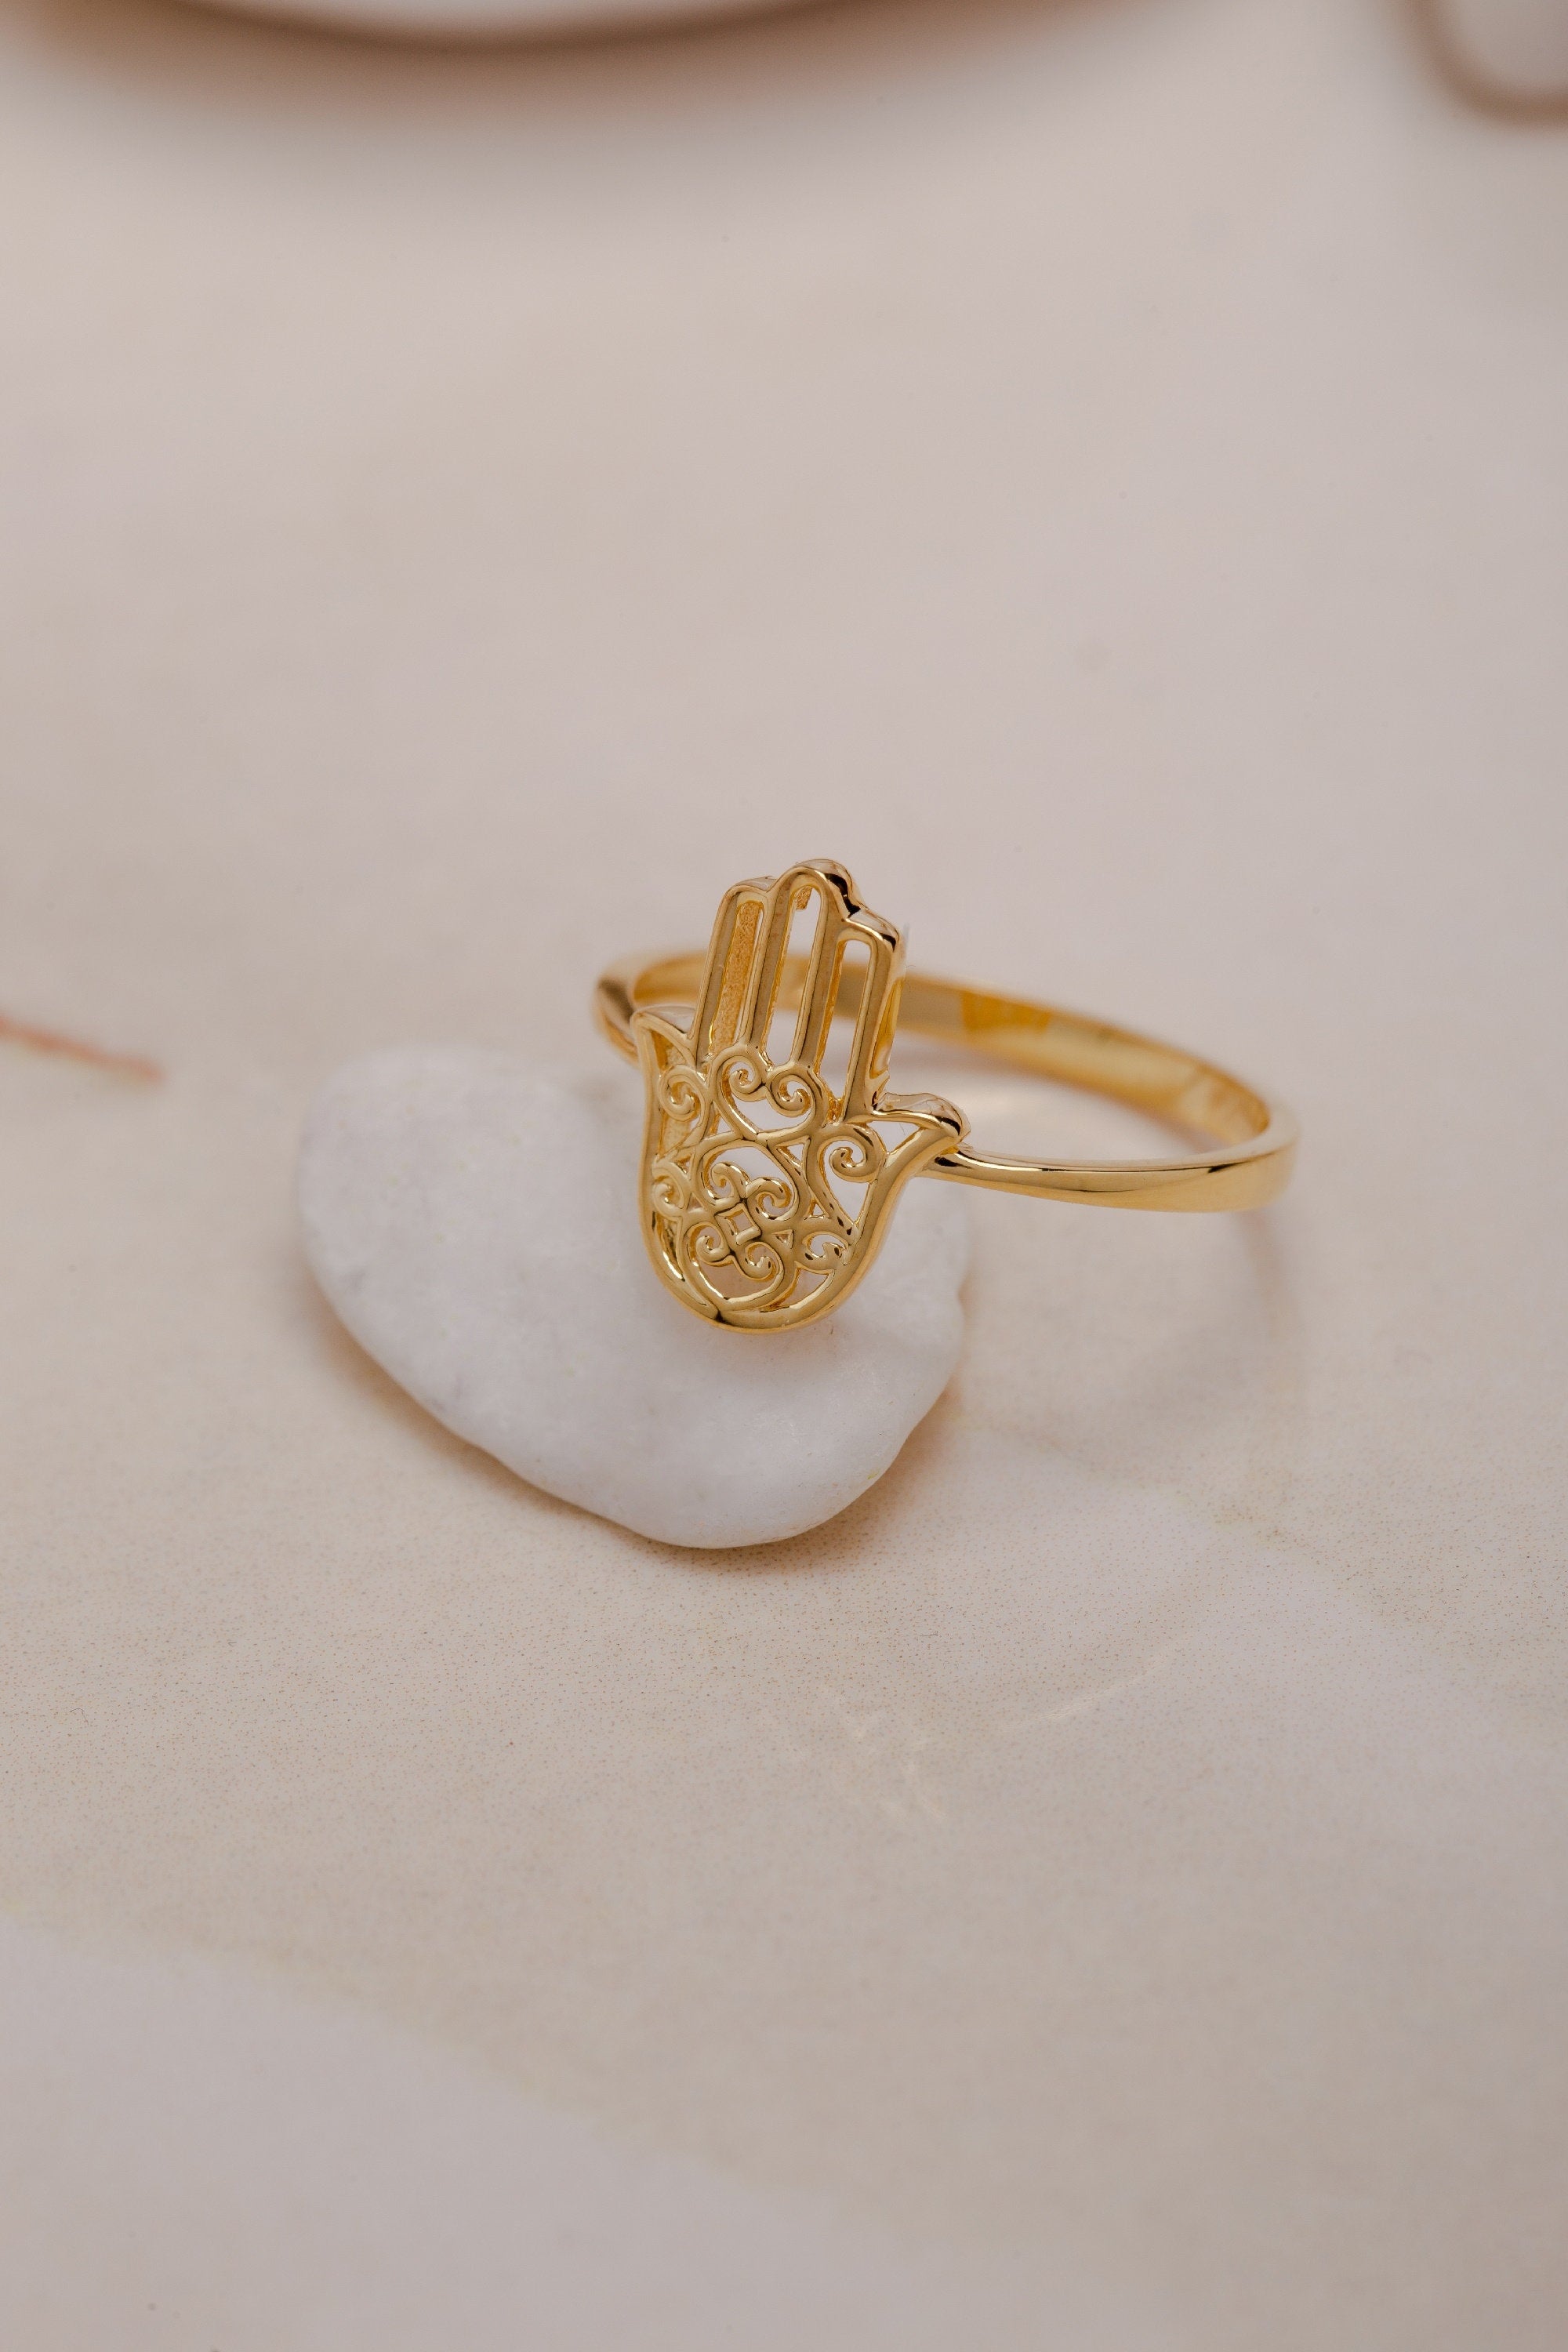 14K Solid Gold Hamsa Hand Ring, 925 Silver Hand of Fatima Ring, Statement Rings, Handmade Ring, Dainty Gold Ring, Gift For Mother Day